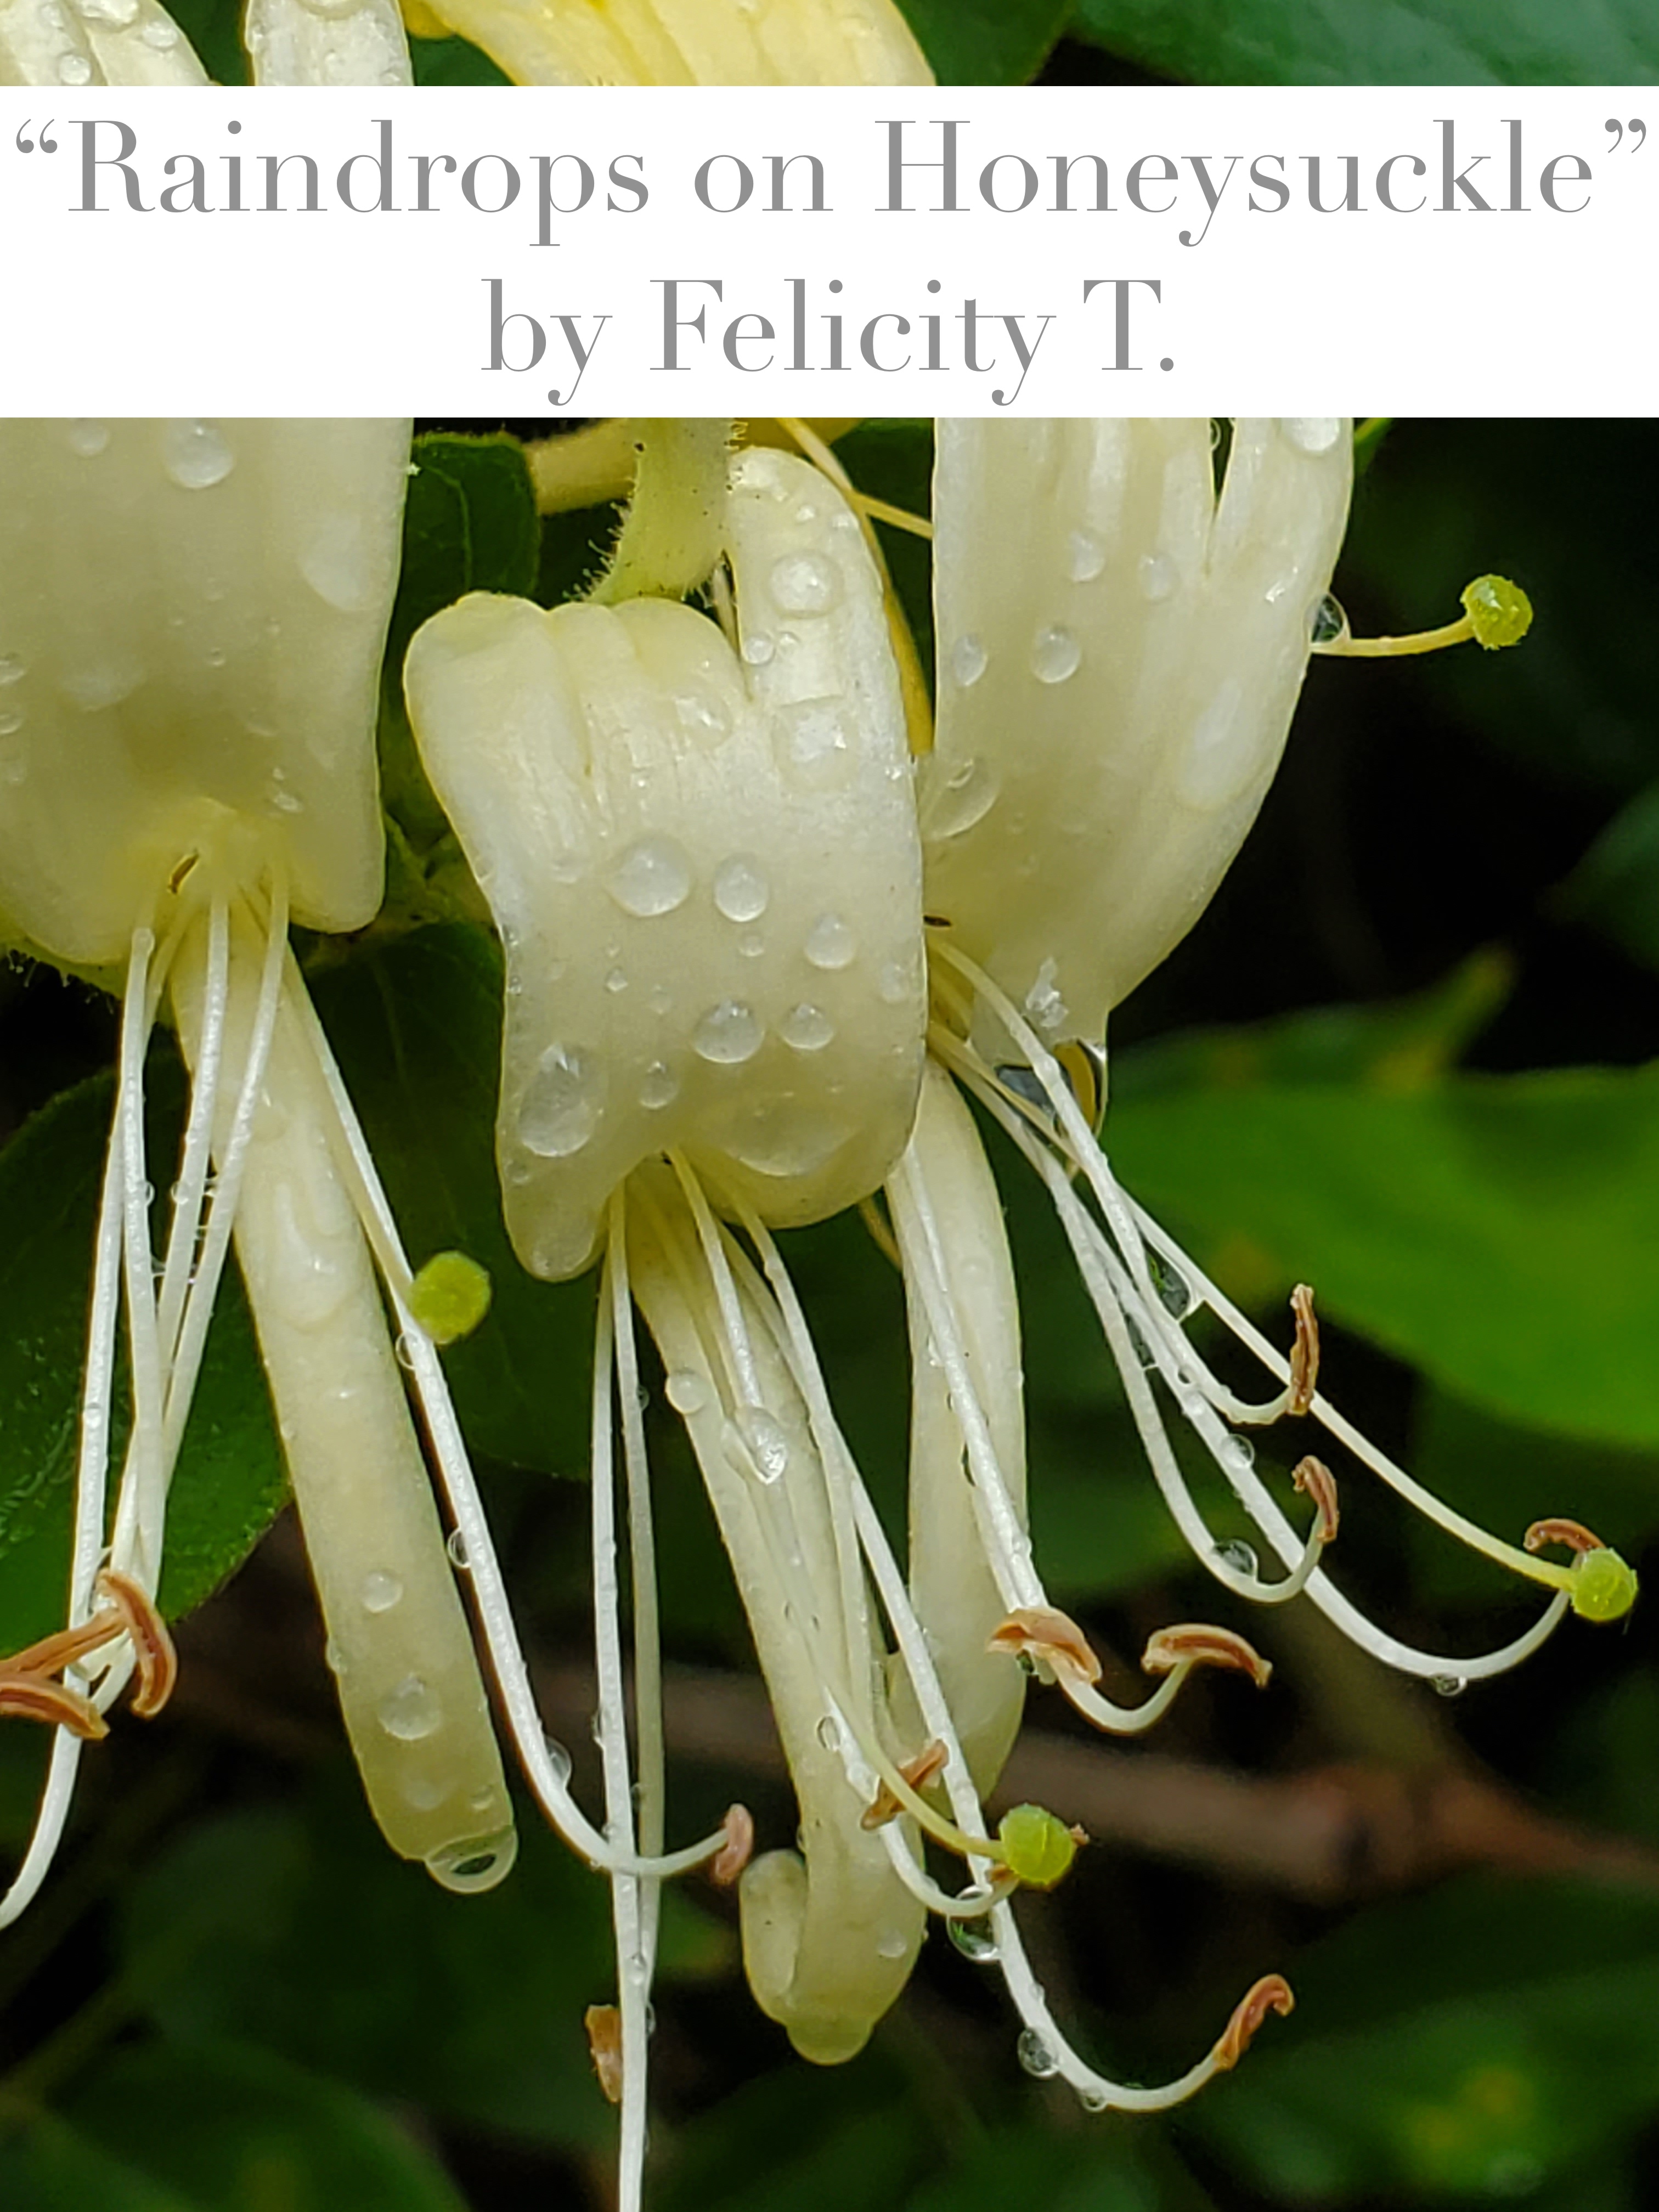 2020 1st place Junior Division: Nature's Beauty "Raindrops on Honeysuckle" taken by Felicity T.